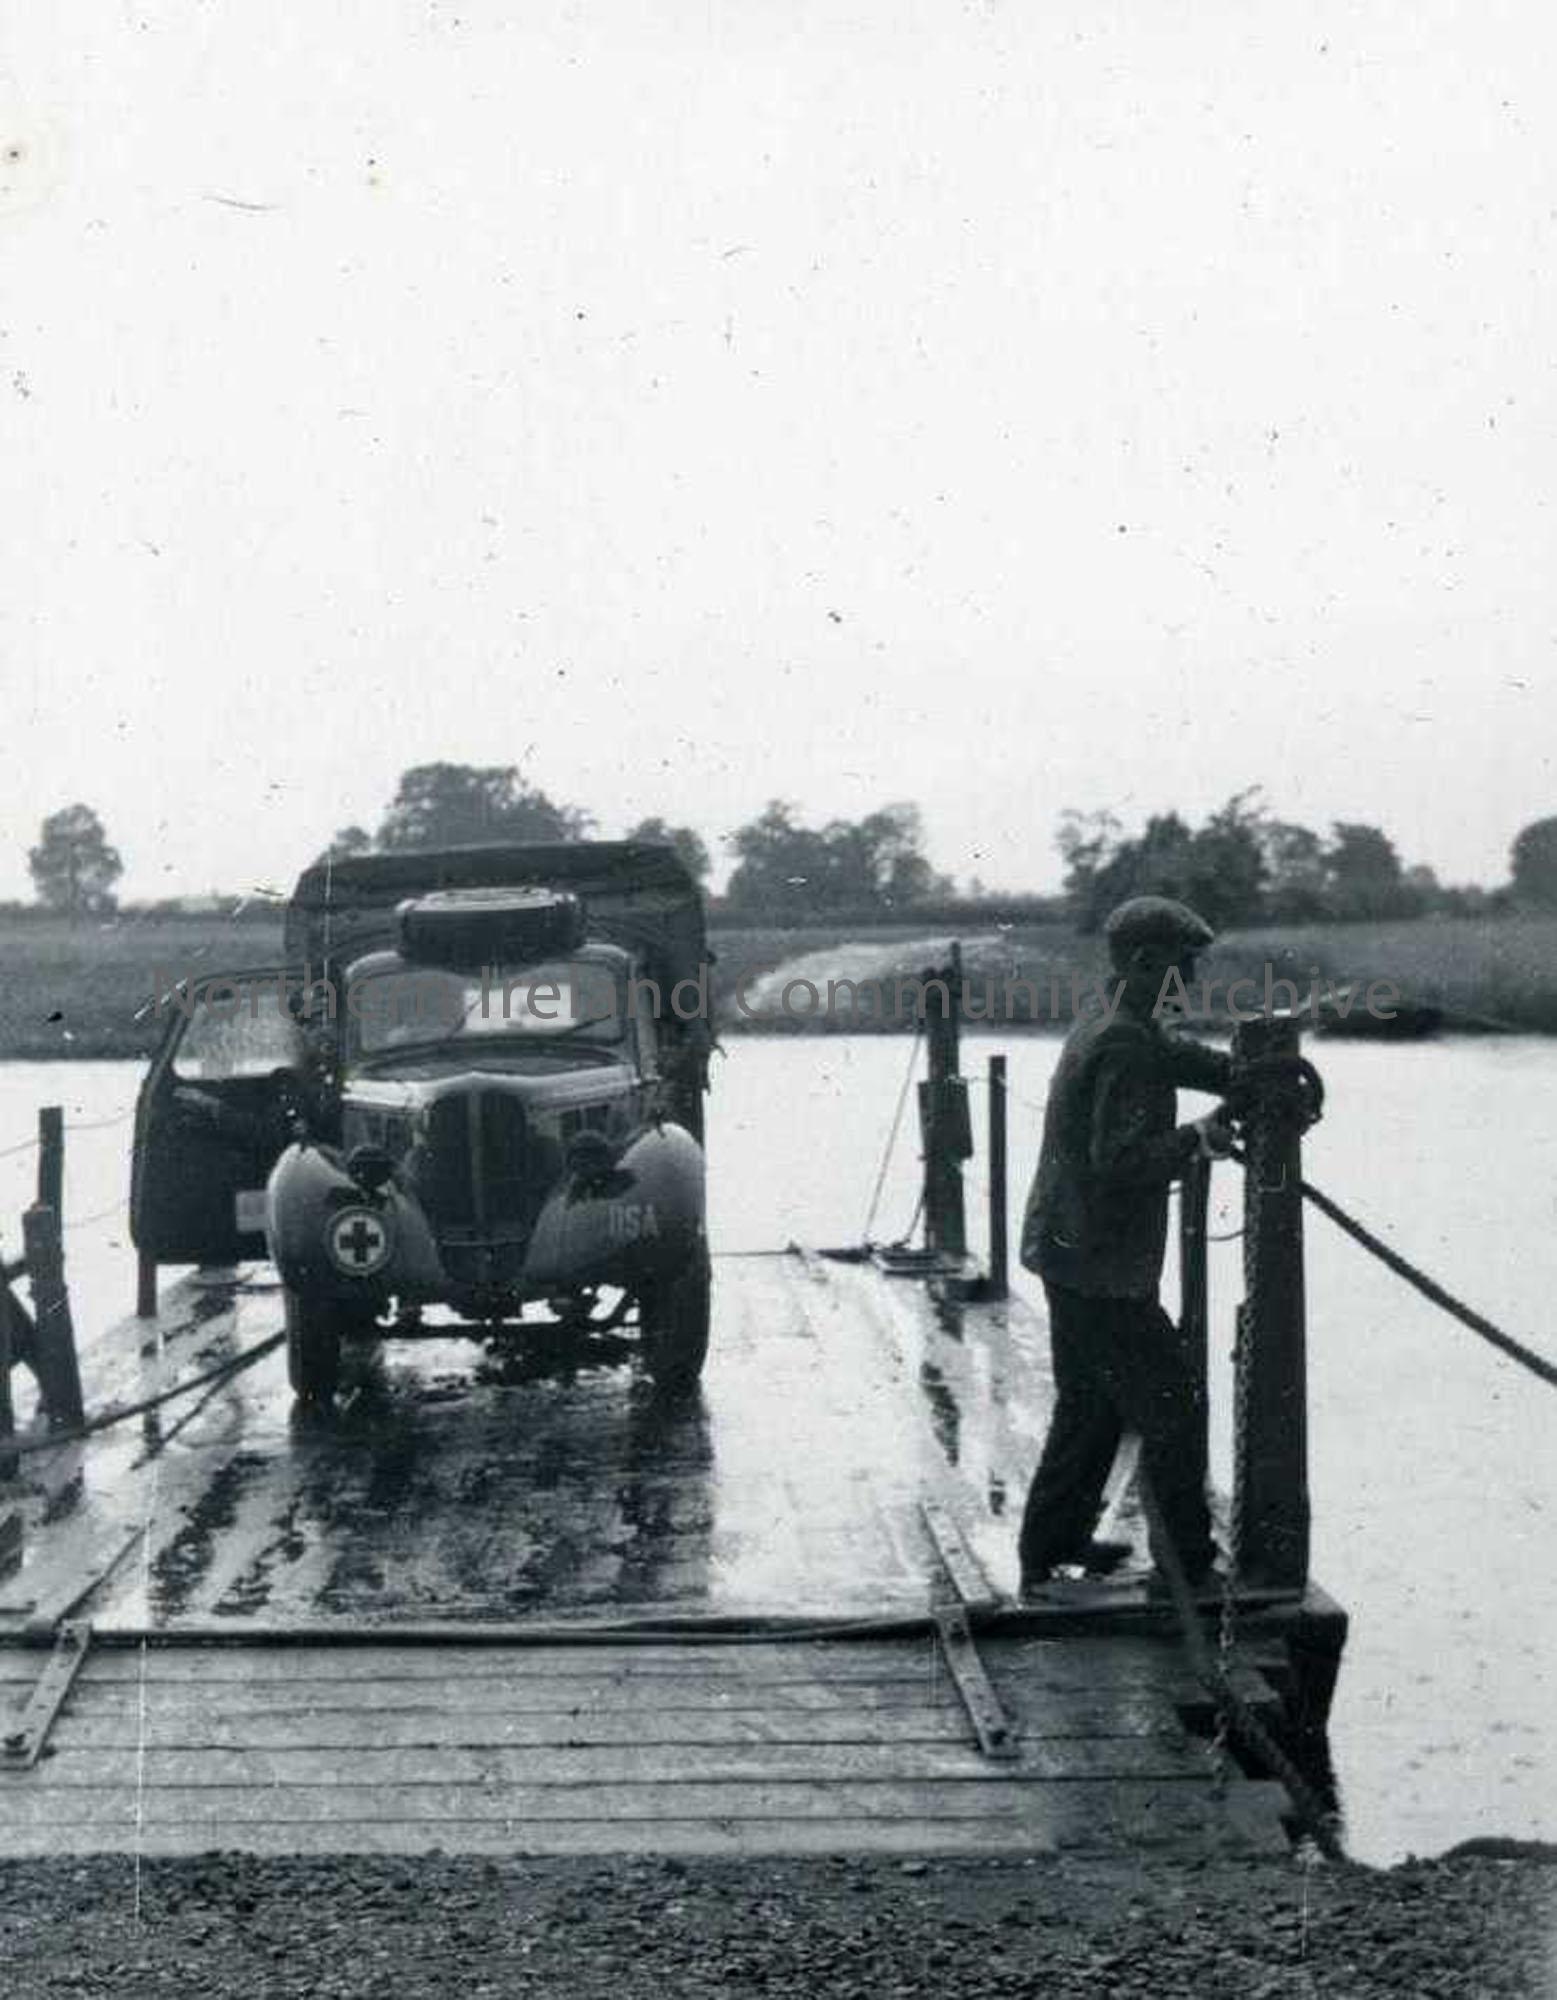 Vehicle on river crossing raft as titled by Sam Henry